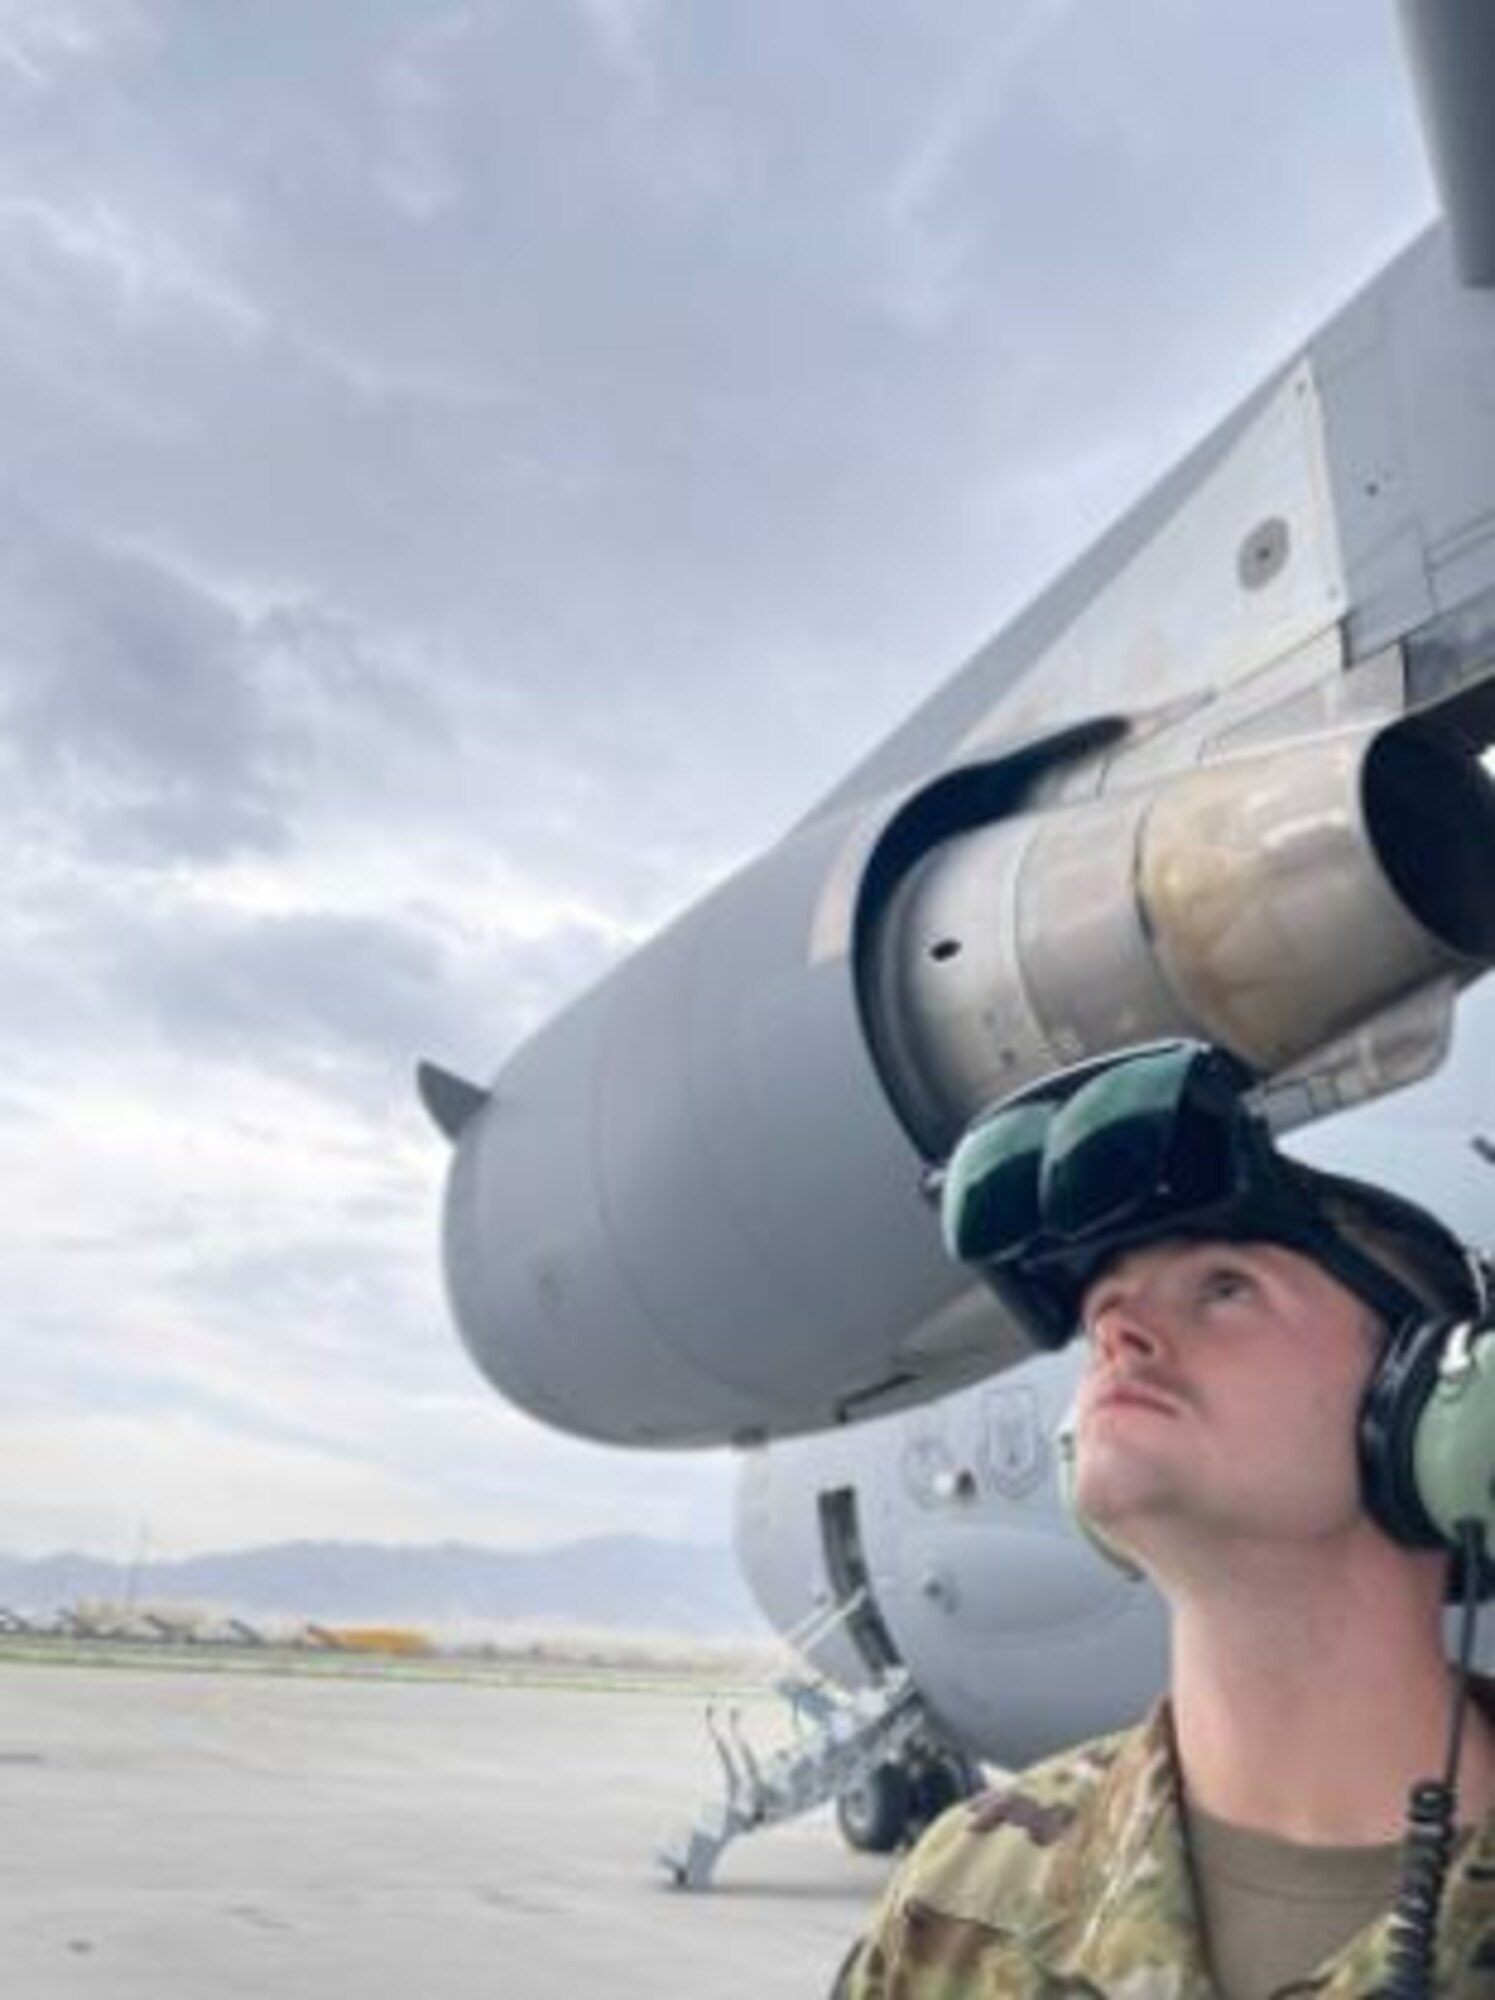 A uniformed Airman looks up at a plane on an overcast day with an AR headset on his head